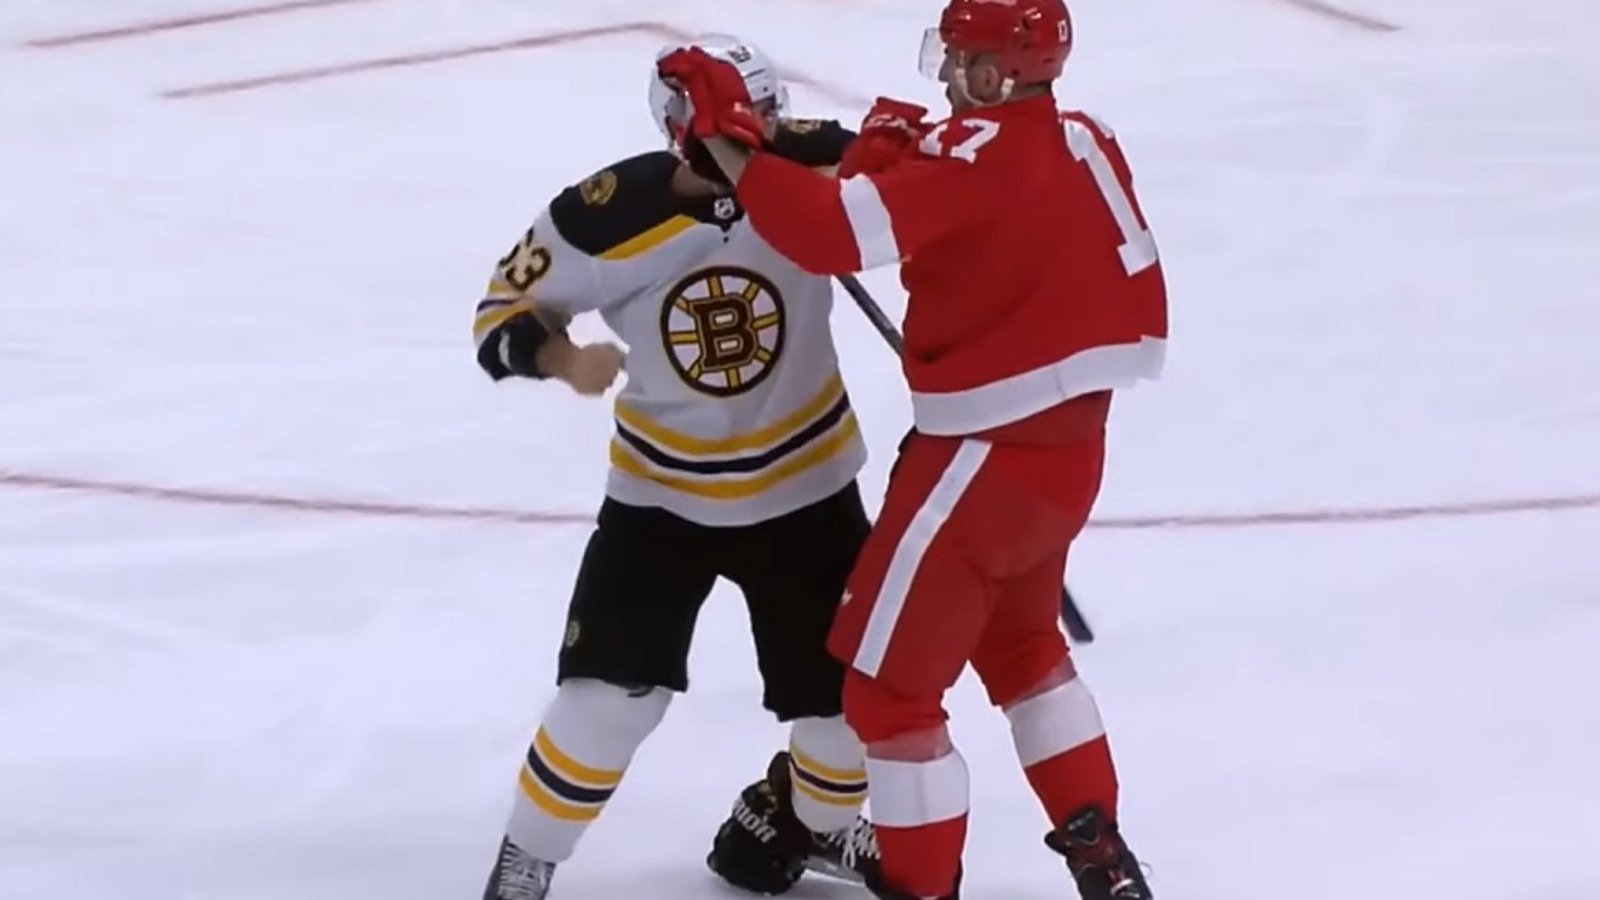 Brad Marchand has enough of Filip Hronek and drops the gloves!